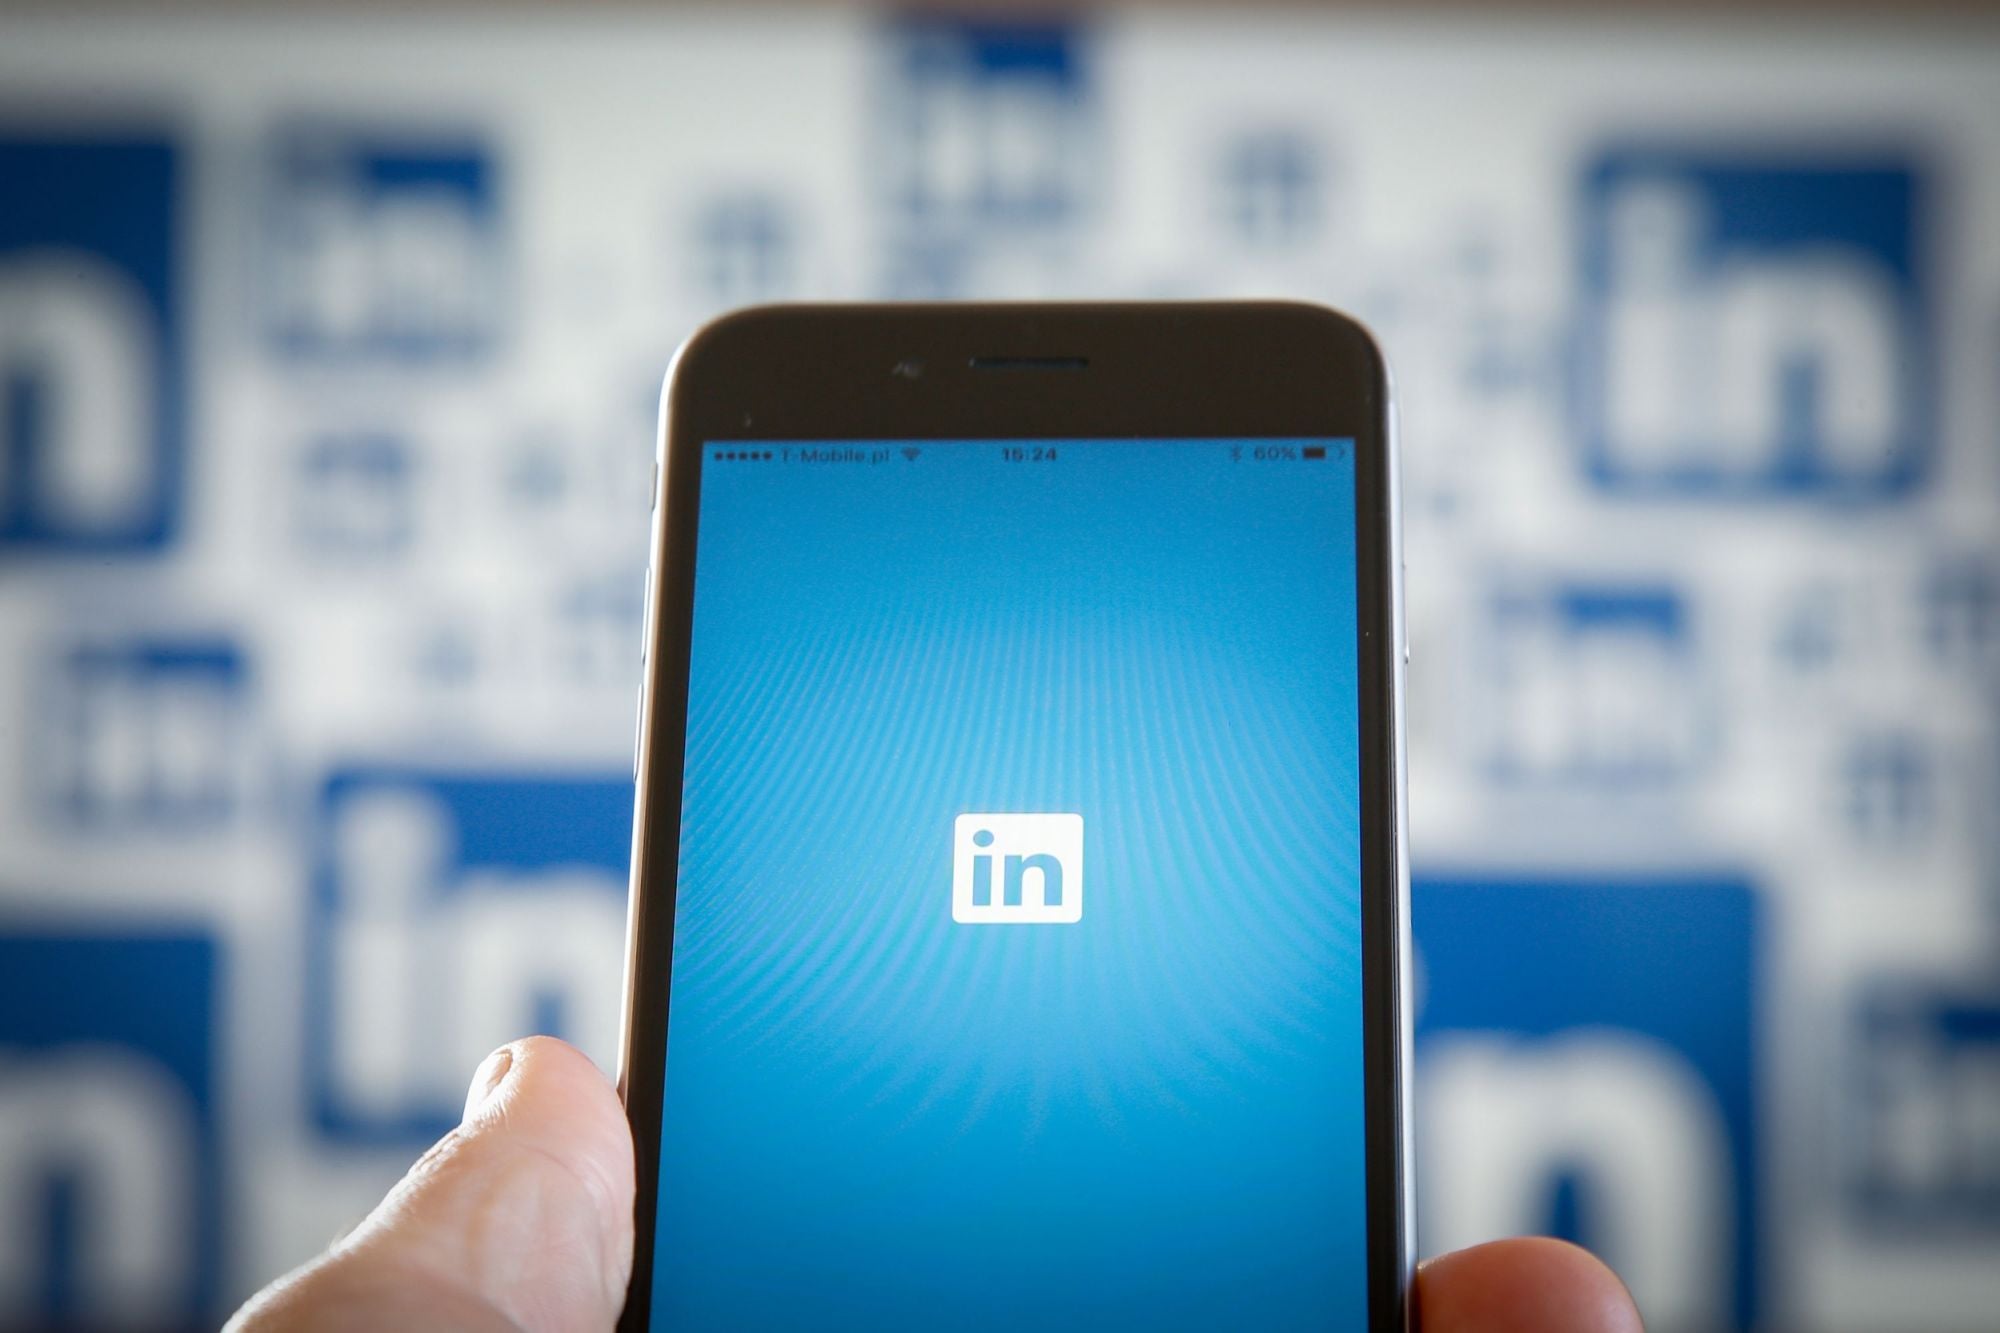 Top 5 LinkedIn Best Practices To Accelerate Your Business In 2022